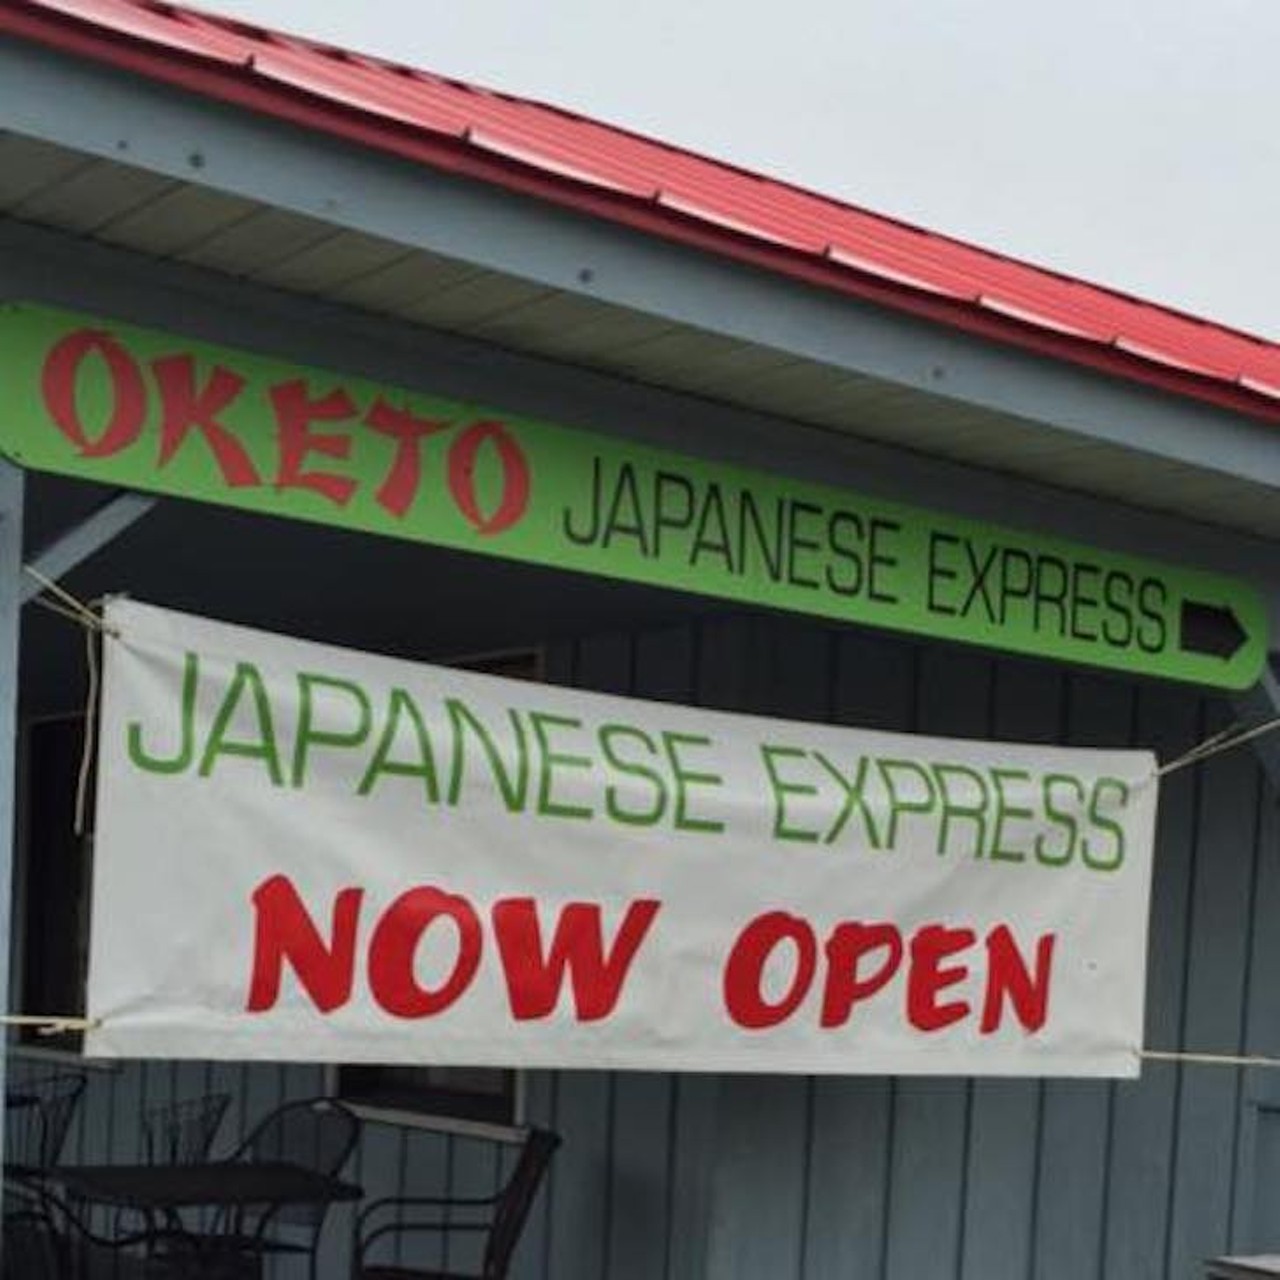 Oketo Japanese Express  
12199 Indian Rocks Rd #4, Largo
No time to sit down and eat? Oketo has locals covered with bomb sushi on the go, so you&#146;re still able to chow down on fresh rolls. Make sure to snag a boba tea on your next visit.
Photo via Oketo Japanese Express/ Facebook